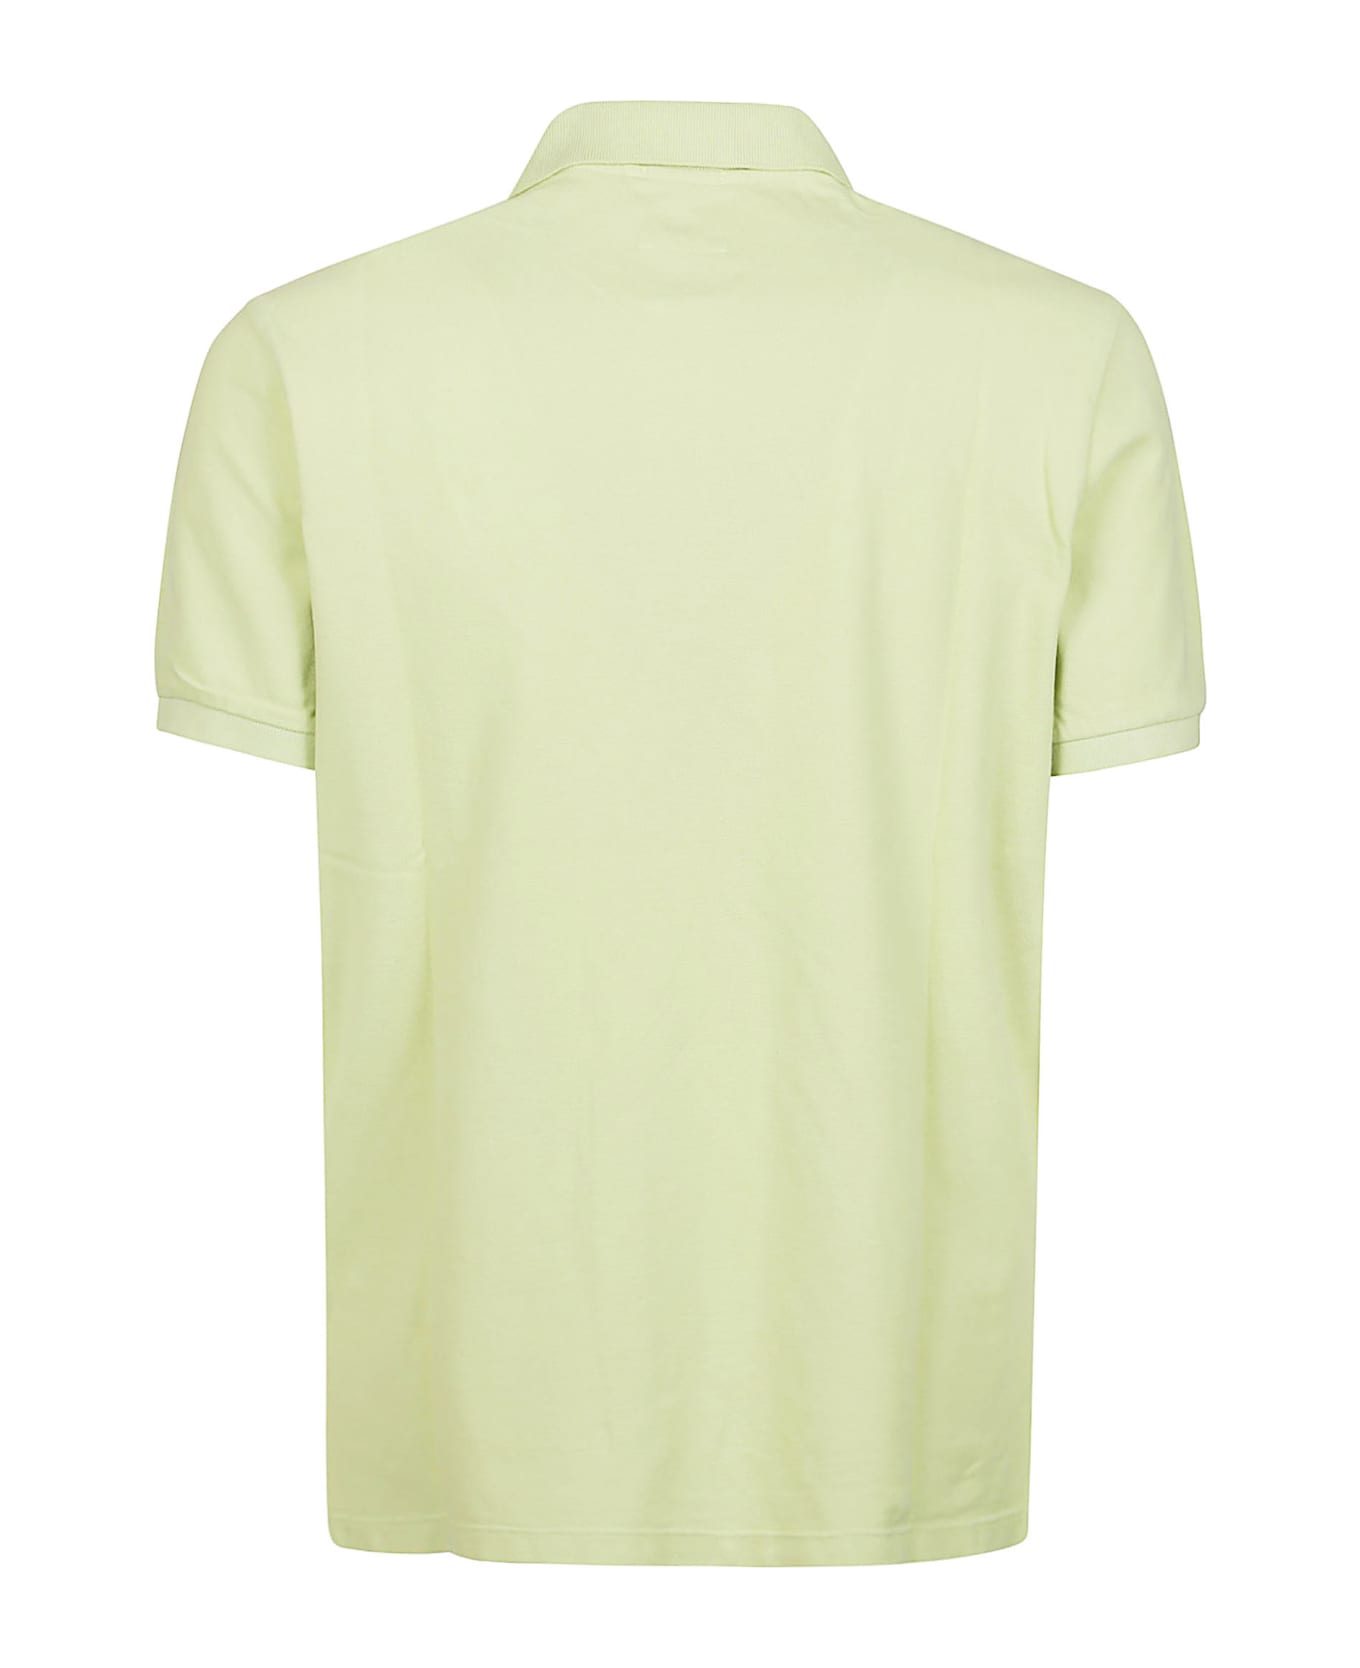 C.P. Company 24/1 Piquet Resist Dyed Short Sleeve Polo Shirt - White Pear ポロシャツ